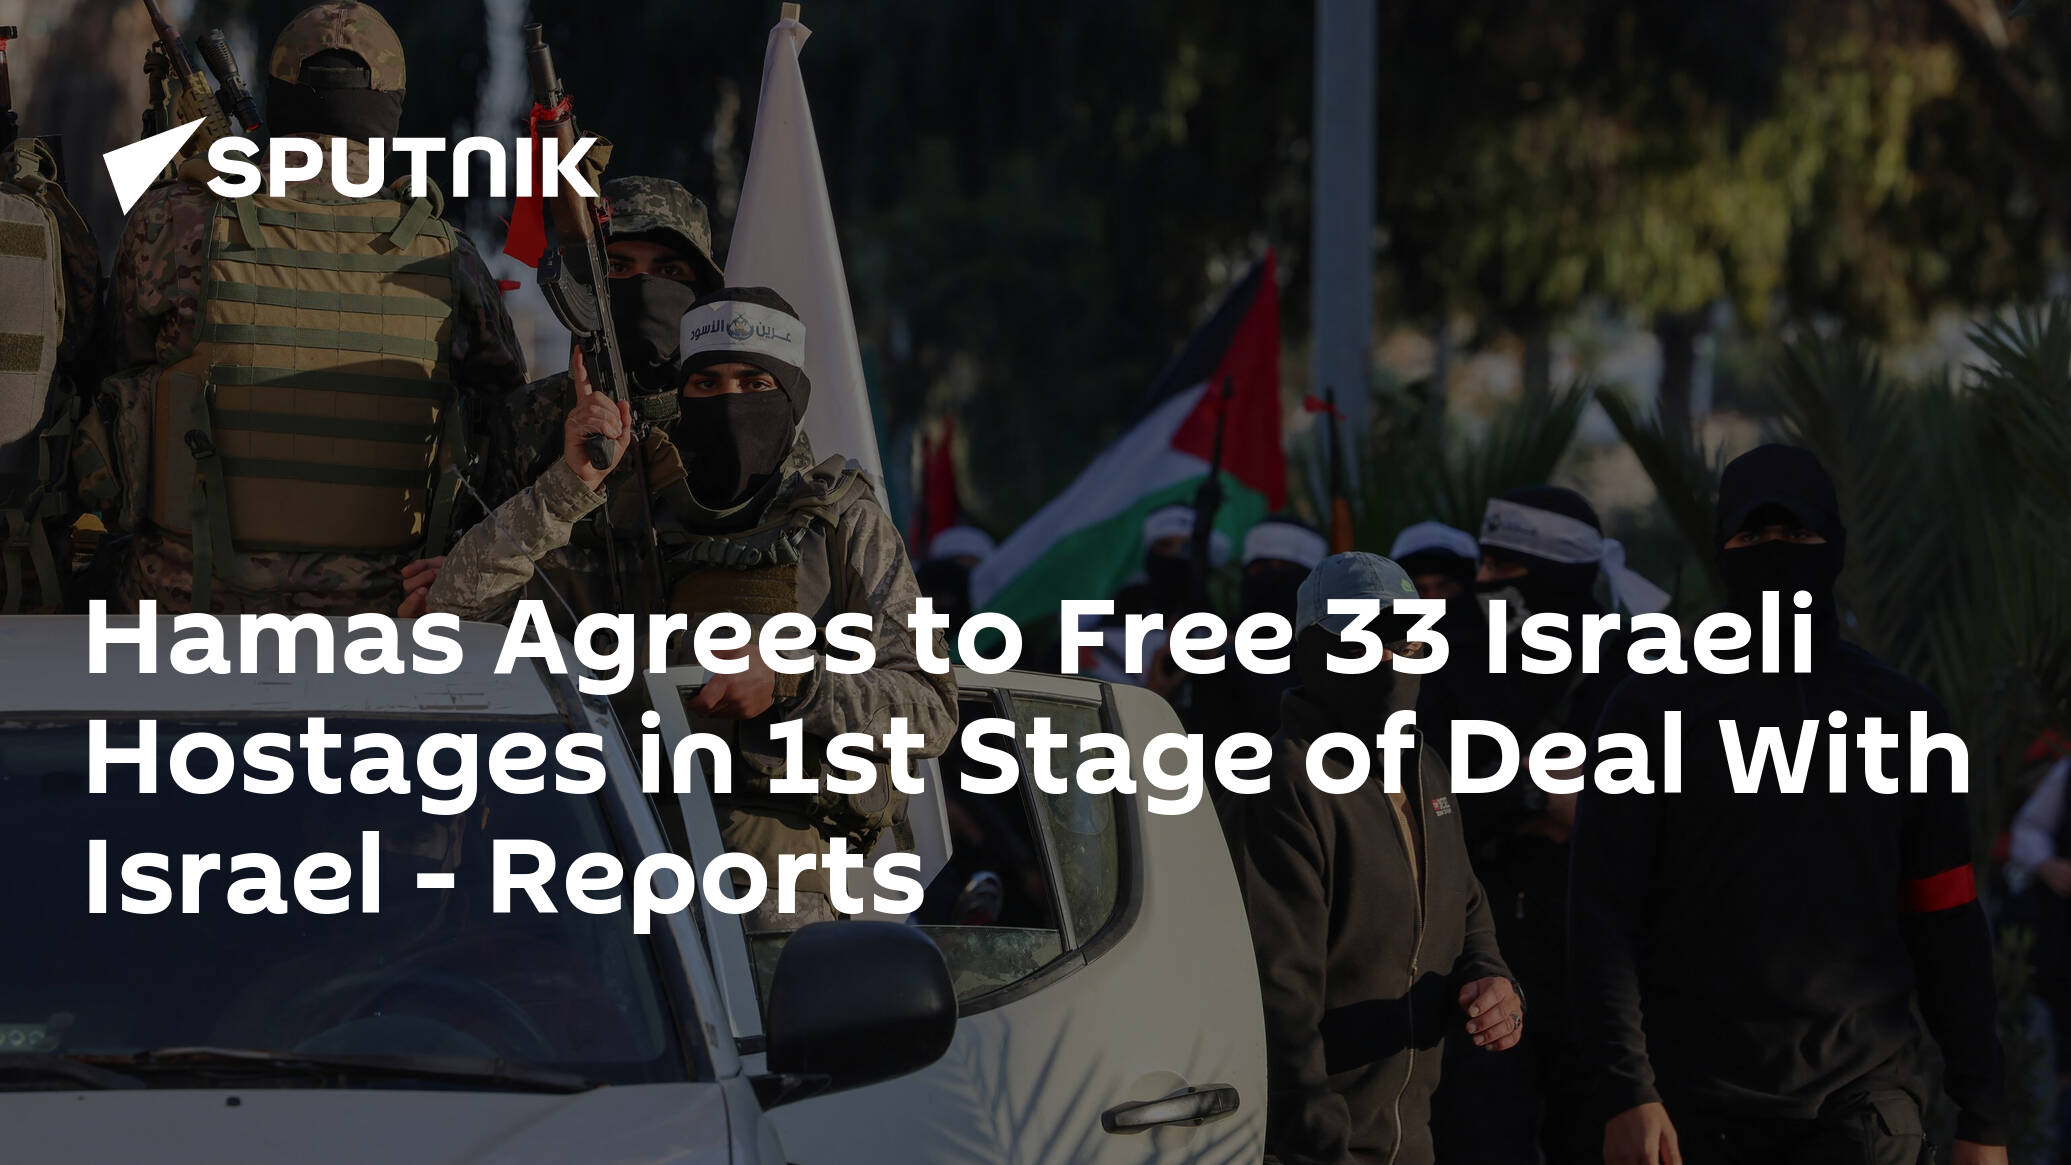 Hamas Agrees to Free 33 Israeli Hostages in 1st Stage of Deal With Israel – Reports